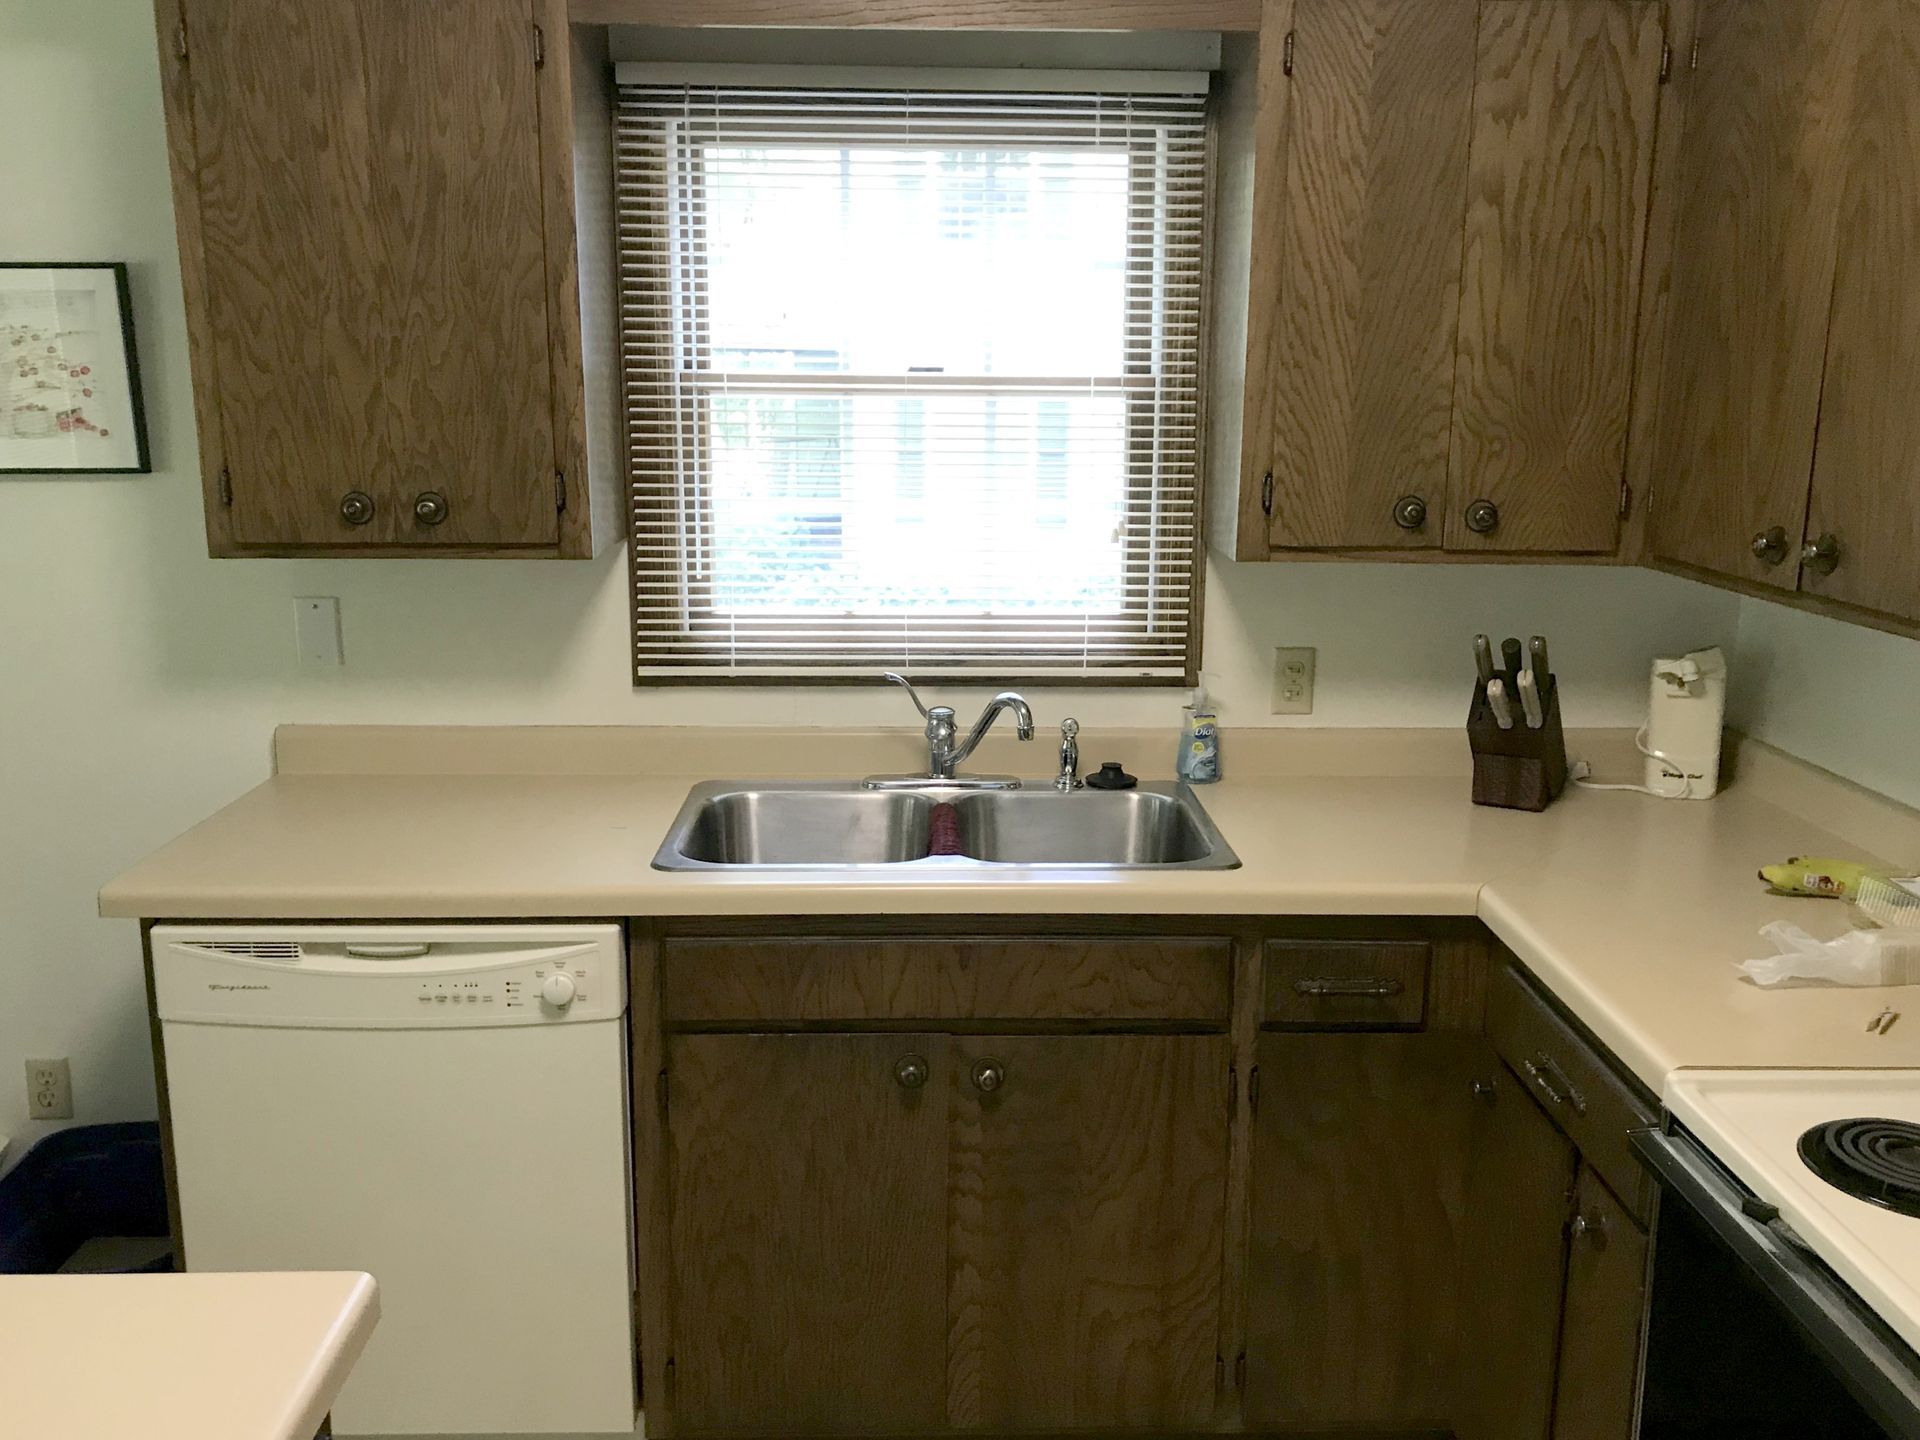 A kitchen with a sink a dishwasher and a window